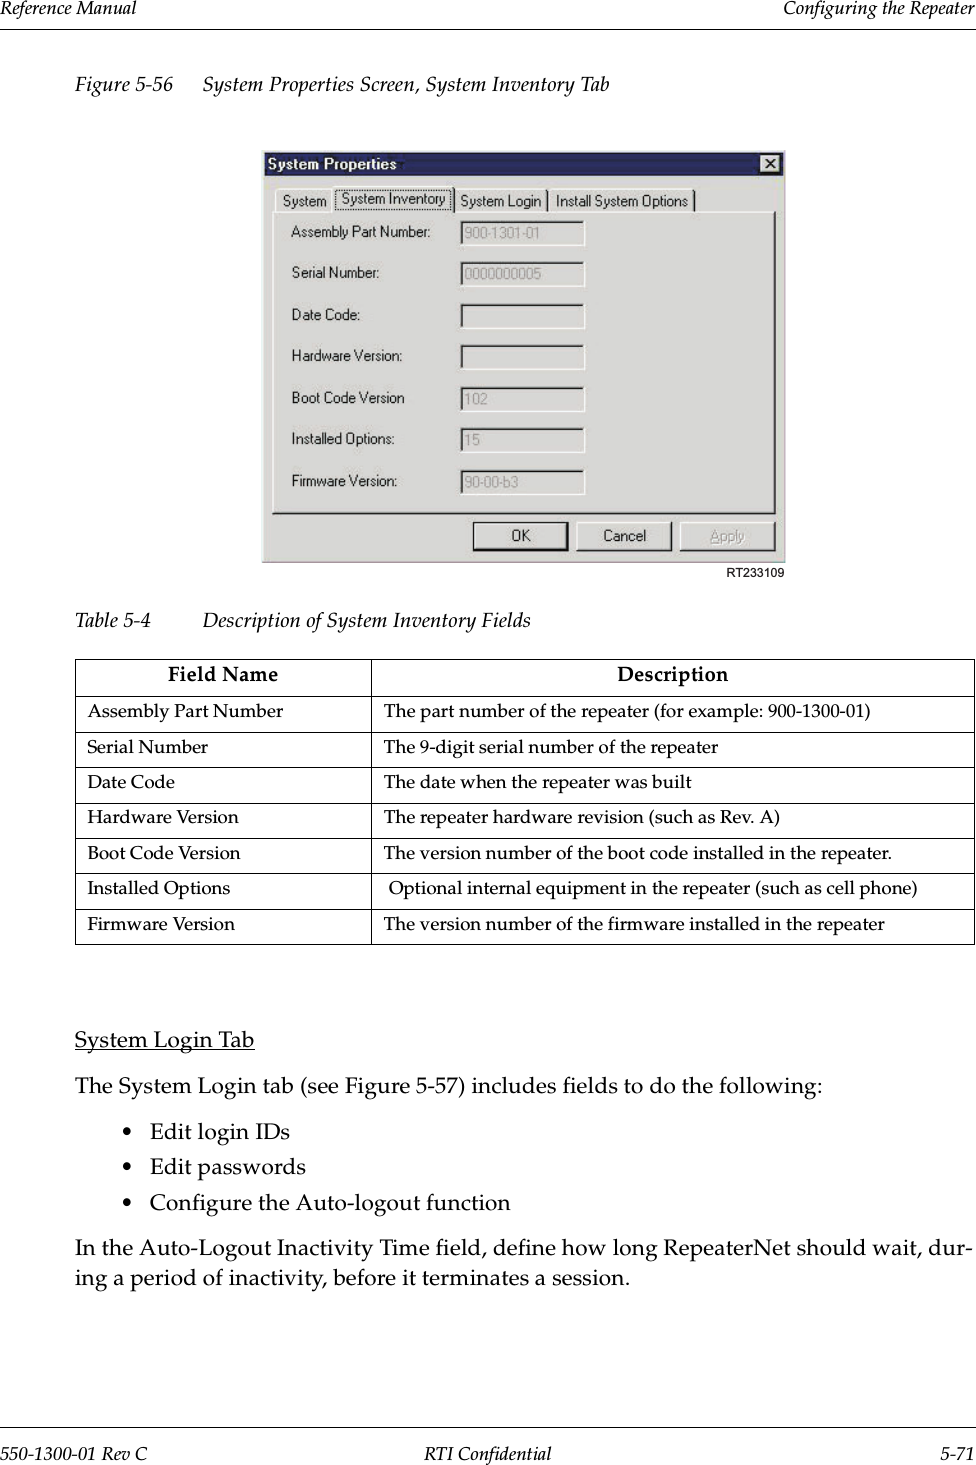 Reference Manual     Configuring the Repeater550-1300-01 Rev C RTI Confidential 5-71Figure 5-56 System Properties Screen, System Inventory TabTable 5-4 Description of System Inventory FieldsSystem Login TabThe System Login tab (see Figure 5-57) includes fields to do the following:•Edit login IDs•Edit passwords•Configure the Auto-logout functionIn the Auto-Logout Inactivity Time field, define how long RepeaterNet should wait, dur-ing a period of inactivity, before it terminates a session.Field Name DescriptionAssembly Part Number The part number of the repeater (for example: 900-1300-01)Serial Number The 9-digit serial number of the repeaterDate Code The date when the repeater was builtHardware Version The repeater hardware revision (such as Rev. A)Boot Code Version The version number of the boot code installed in the repeater.Installed Options   Optional internal equipment in the repeater (such as cell phone)Firmware Version The version number of the firmware installed in the repeaterRT233109